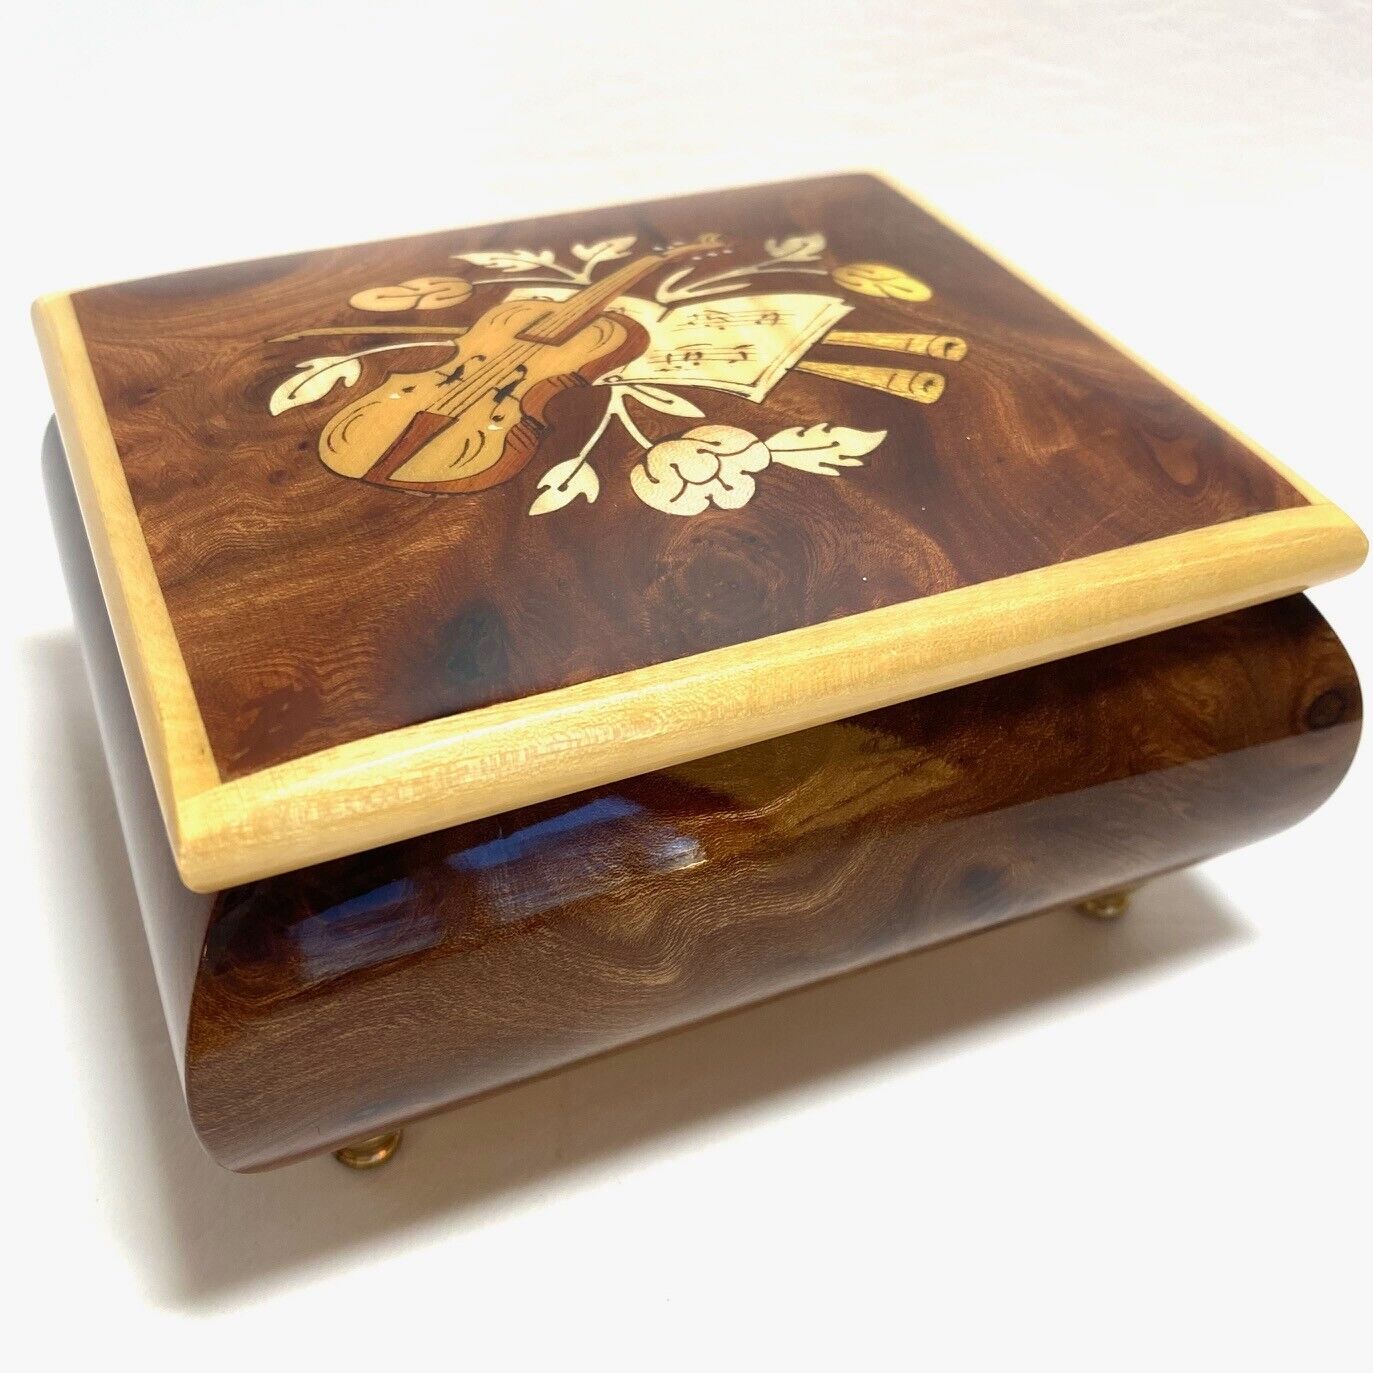 Vintage Music Box Romance Edelweiss R Rodgers Swiss made Reuge Inlaid Wood Italy